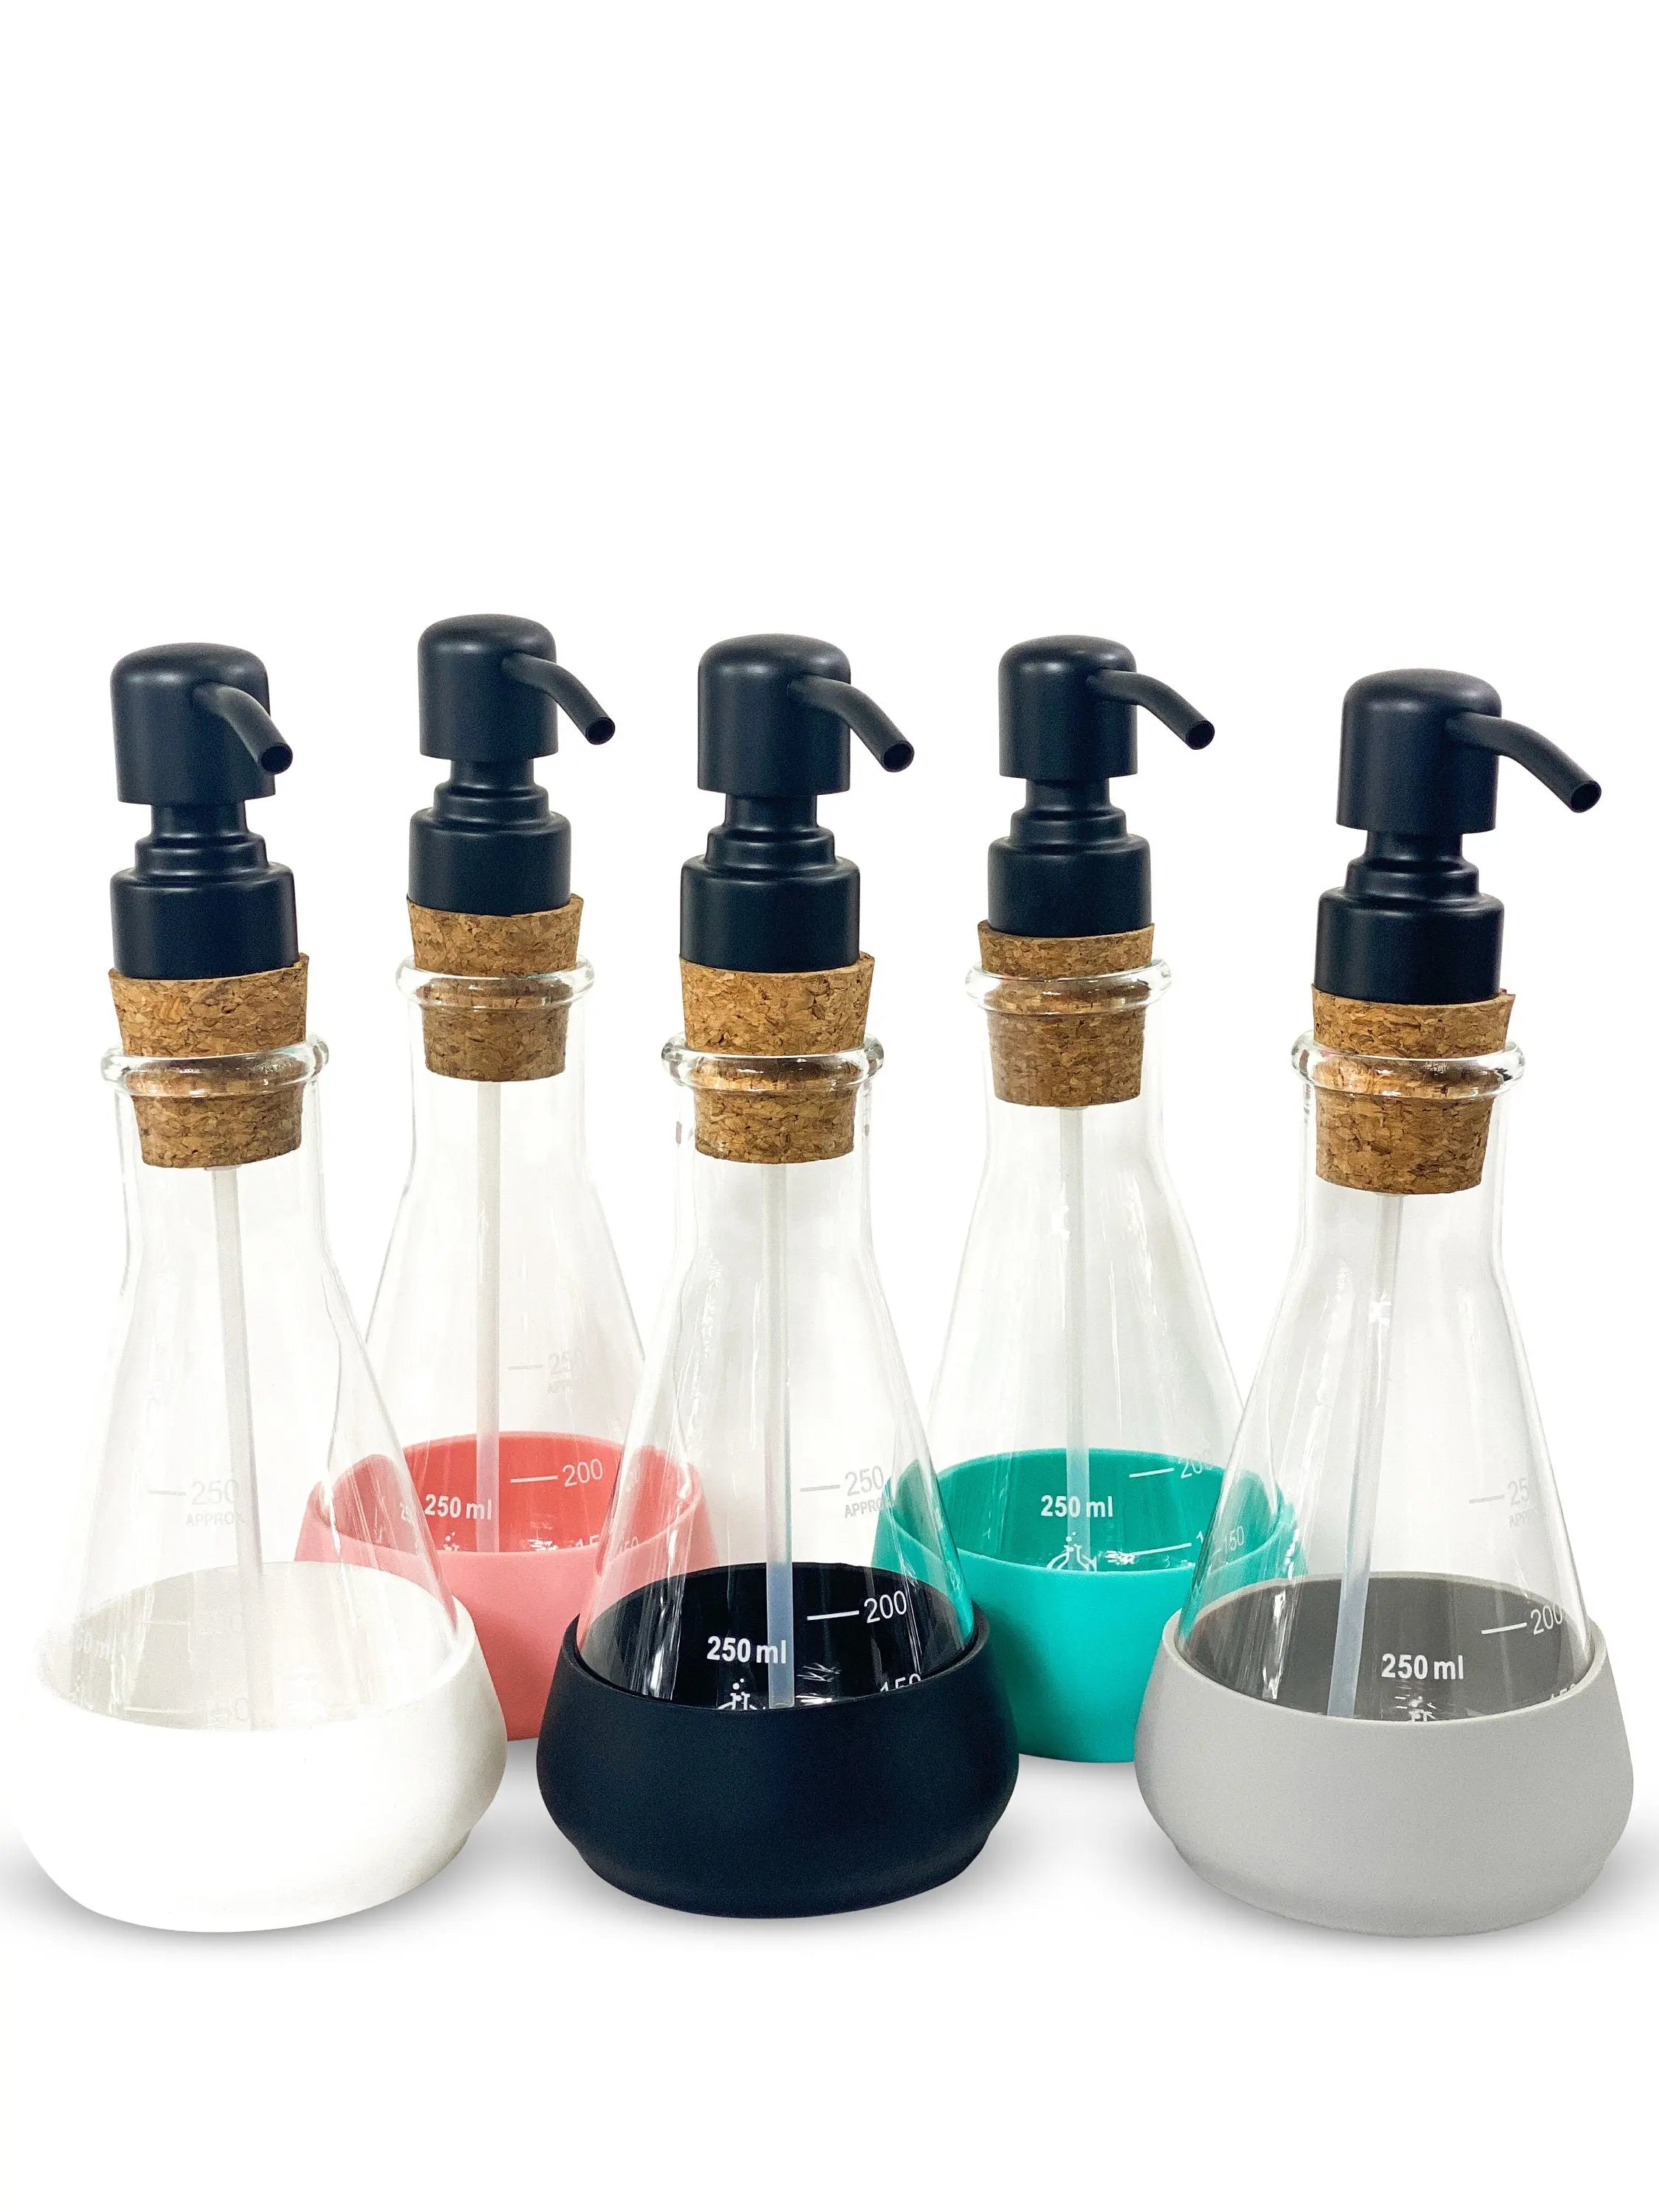 Chemistry bathroom Soap Dispenser with Cork Stopper for science gifts for professionals and academics